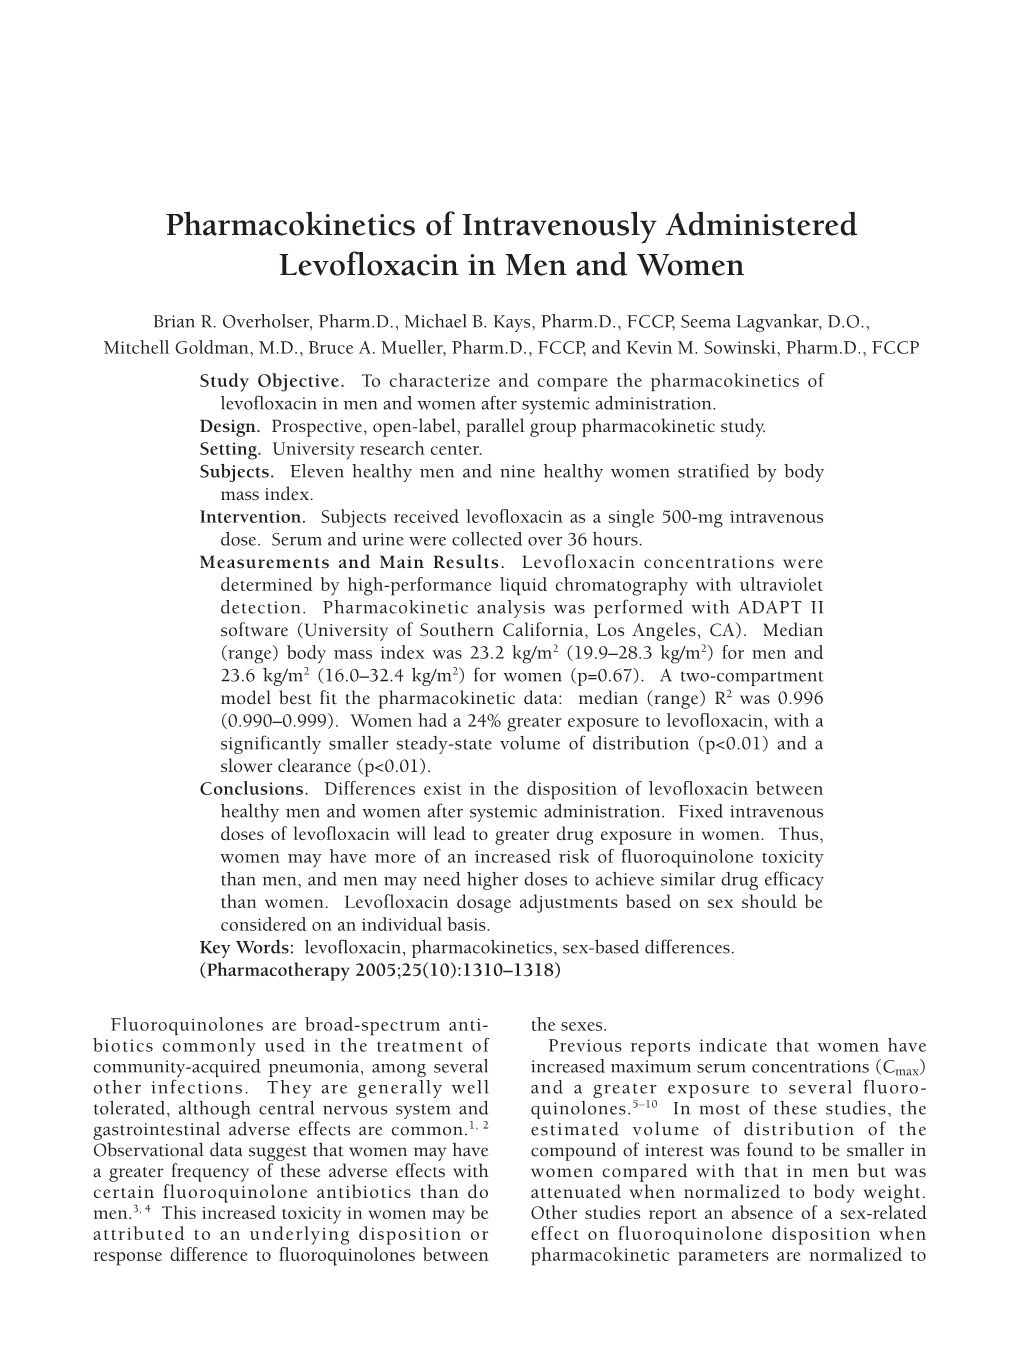 Pharmacokinetics of Intravenously Administered Levofloxacin in Men and Women